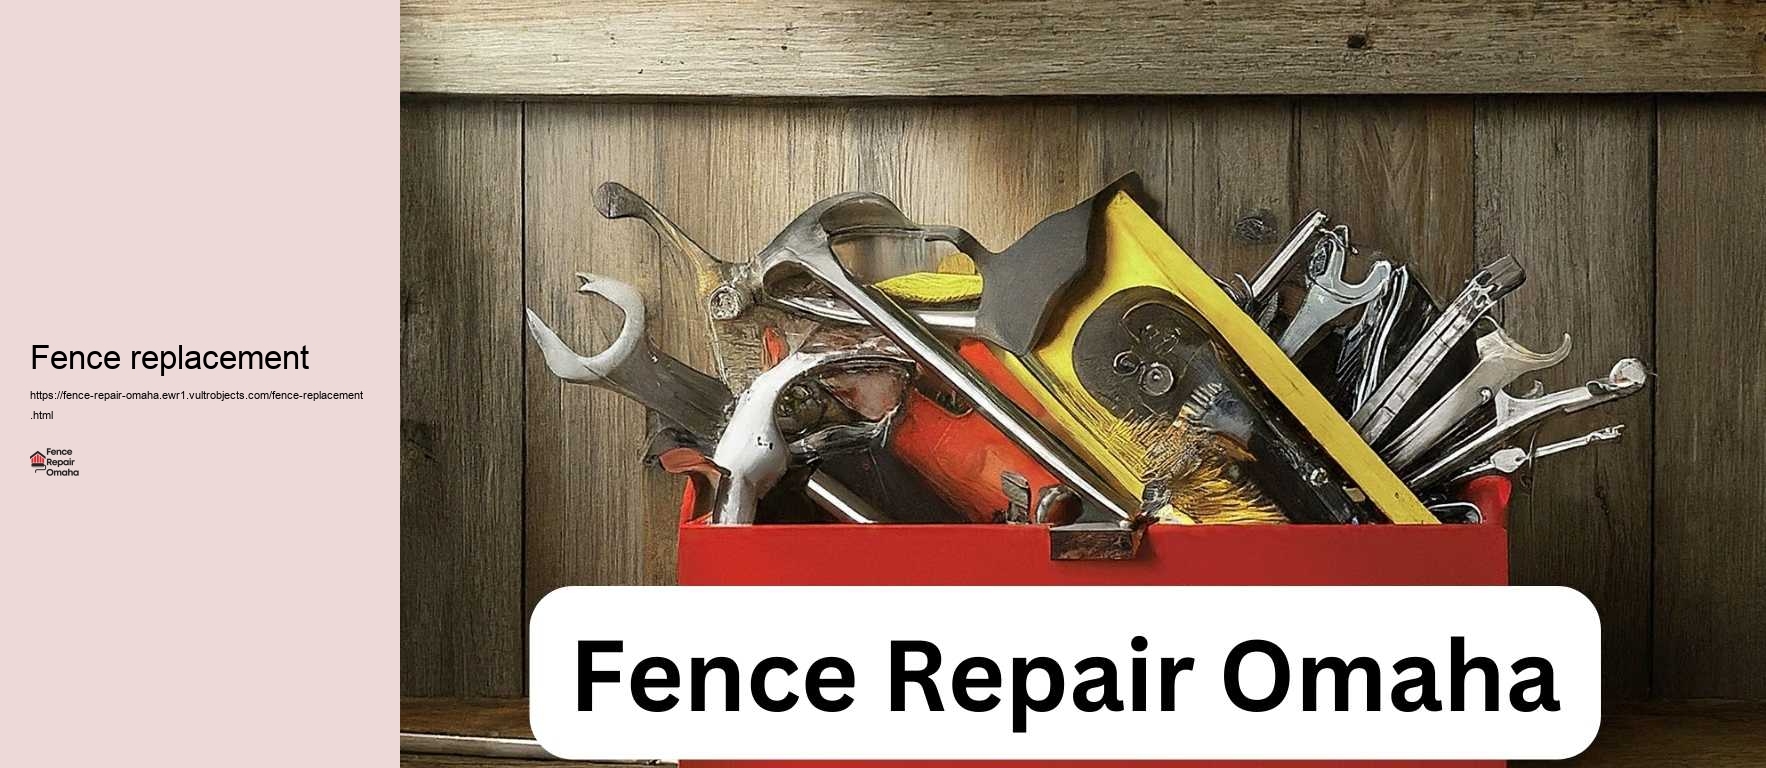 Fence replacement